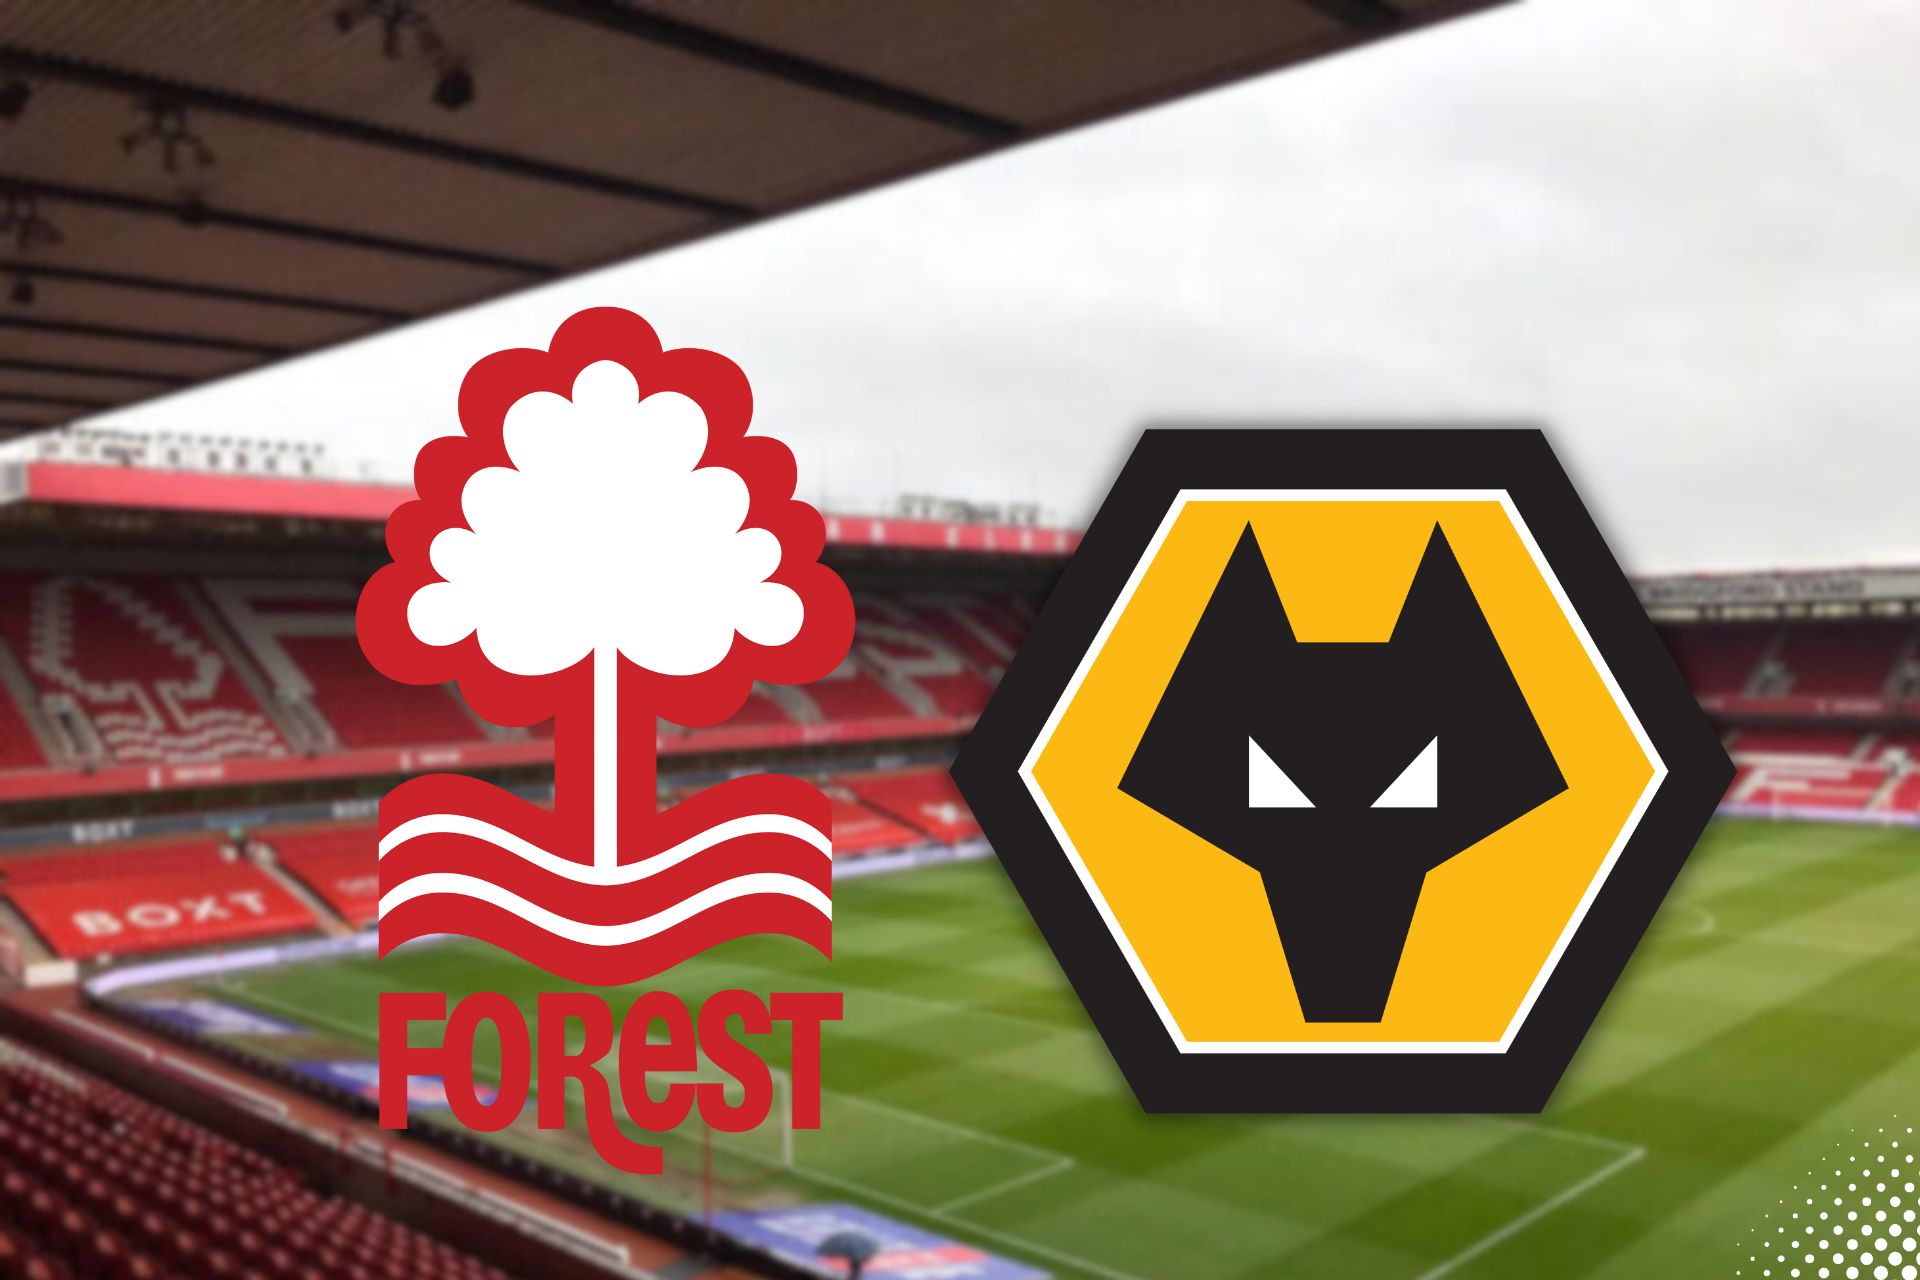 match preview: CAN WOLVES FELL FOREST? - Always Wolves